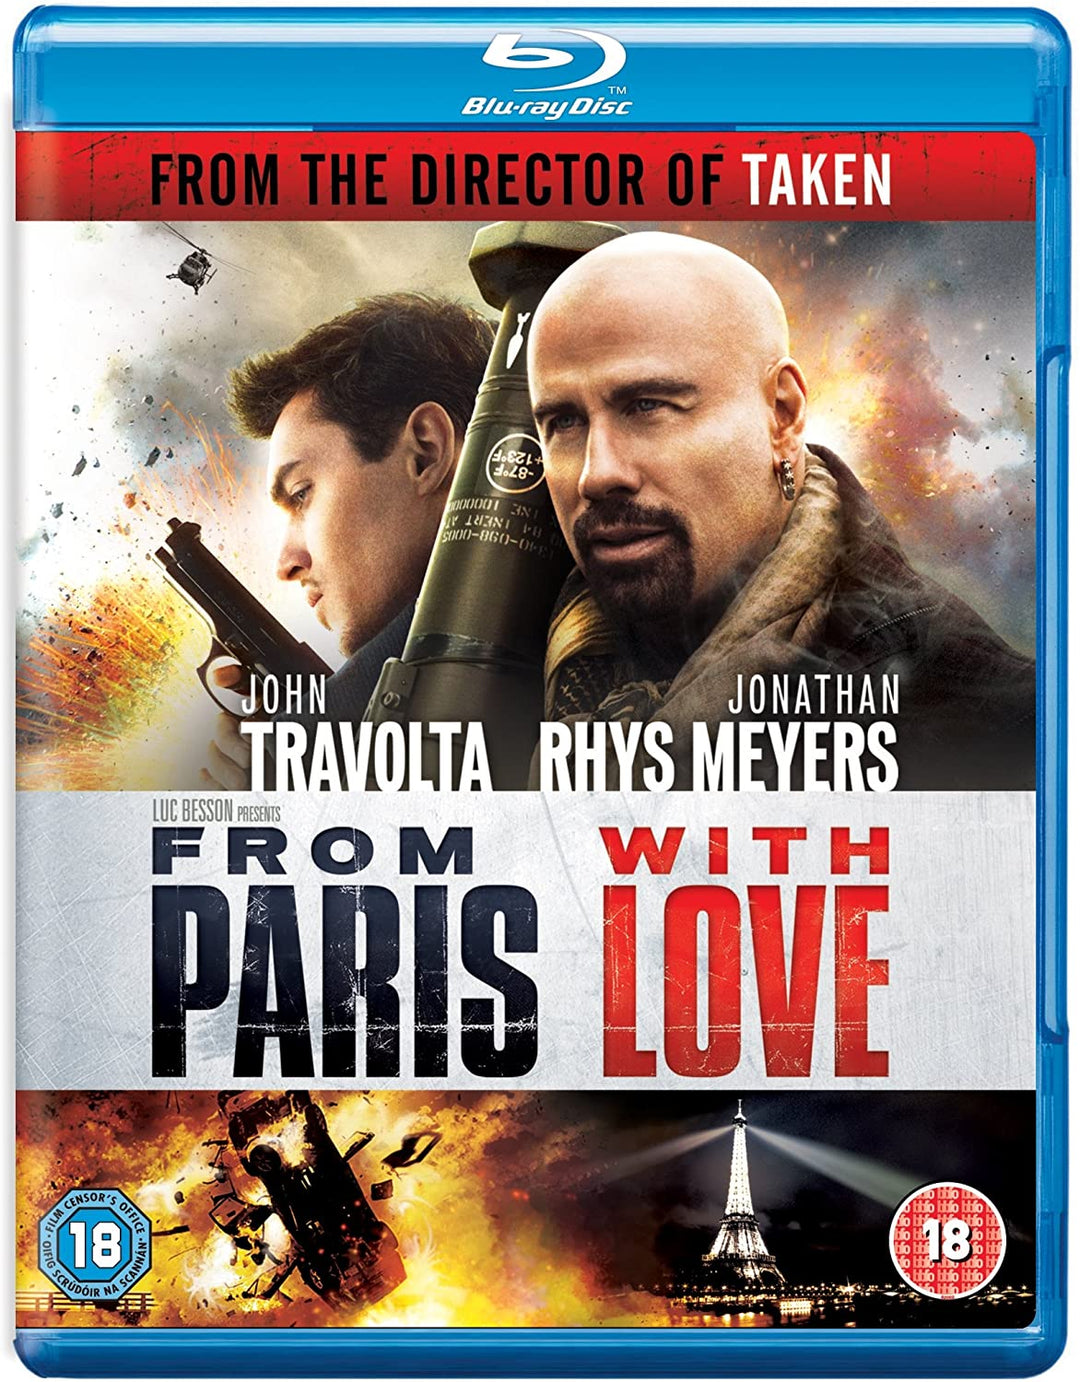 From Paris With Love [2010] [Region Free] [Blu-ray]